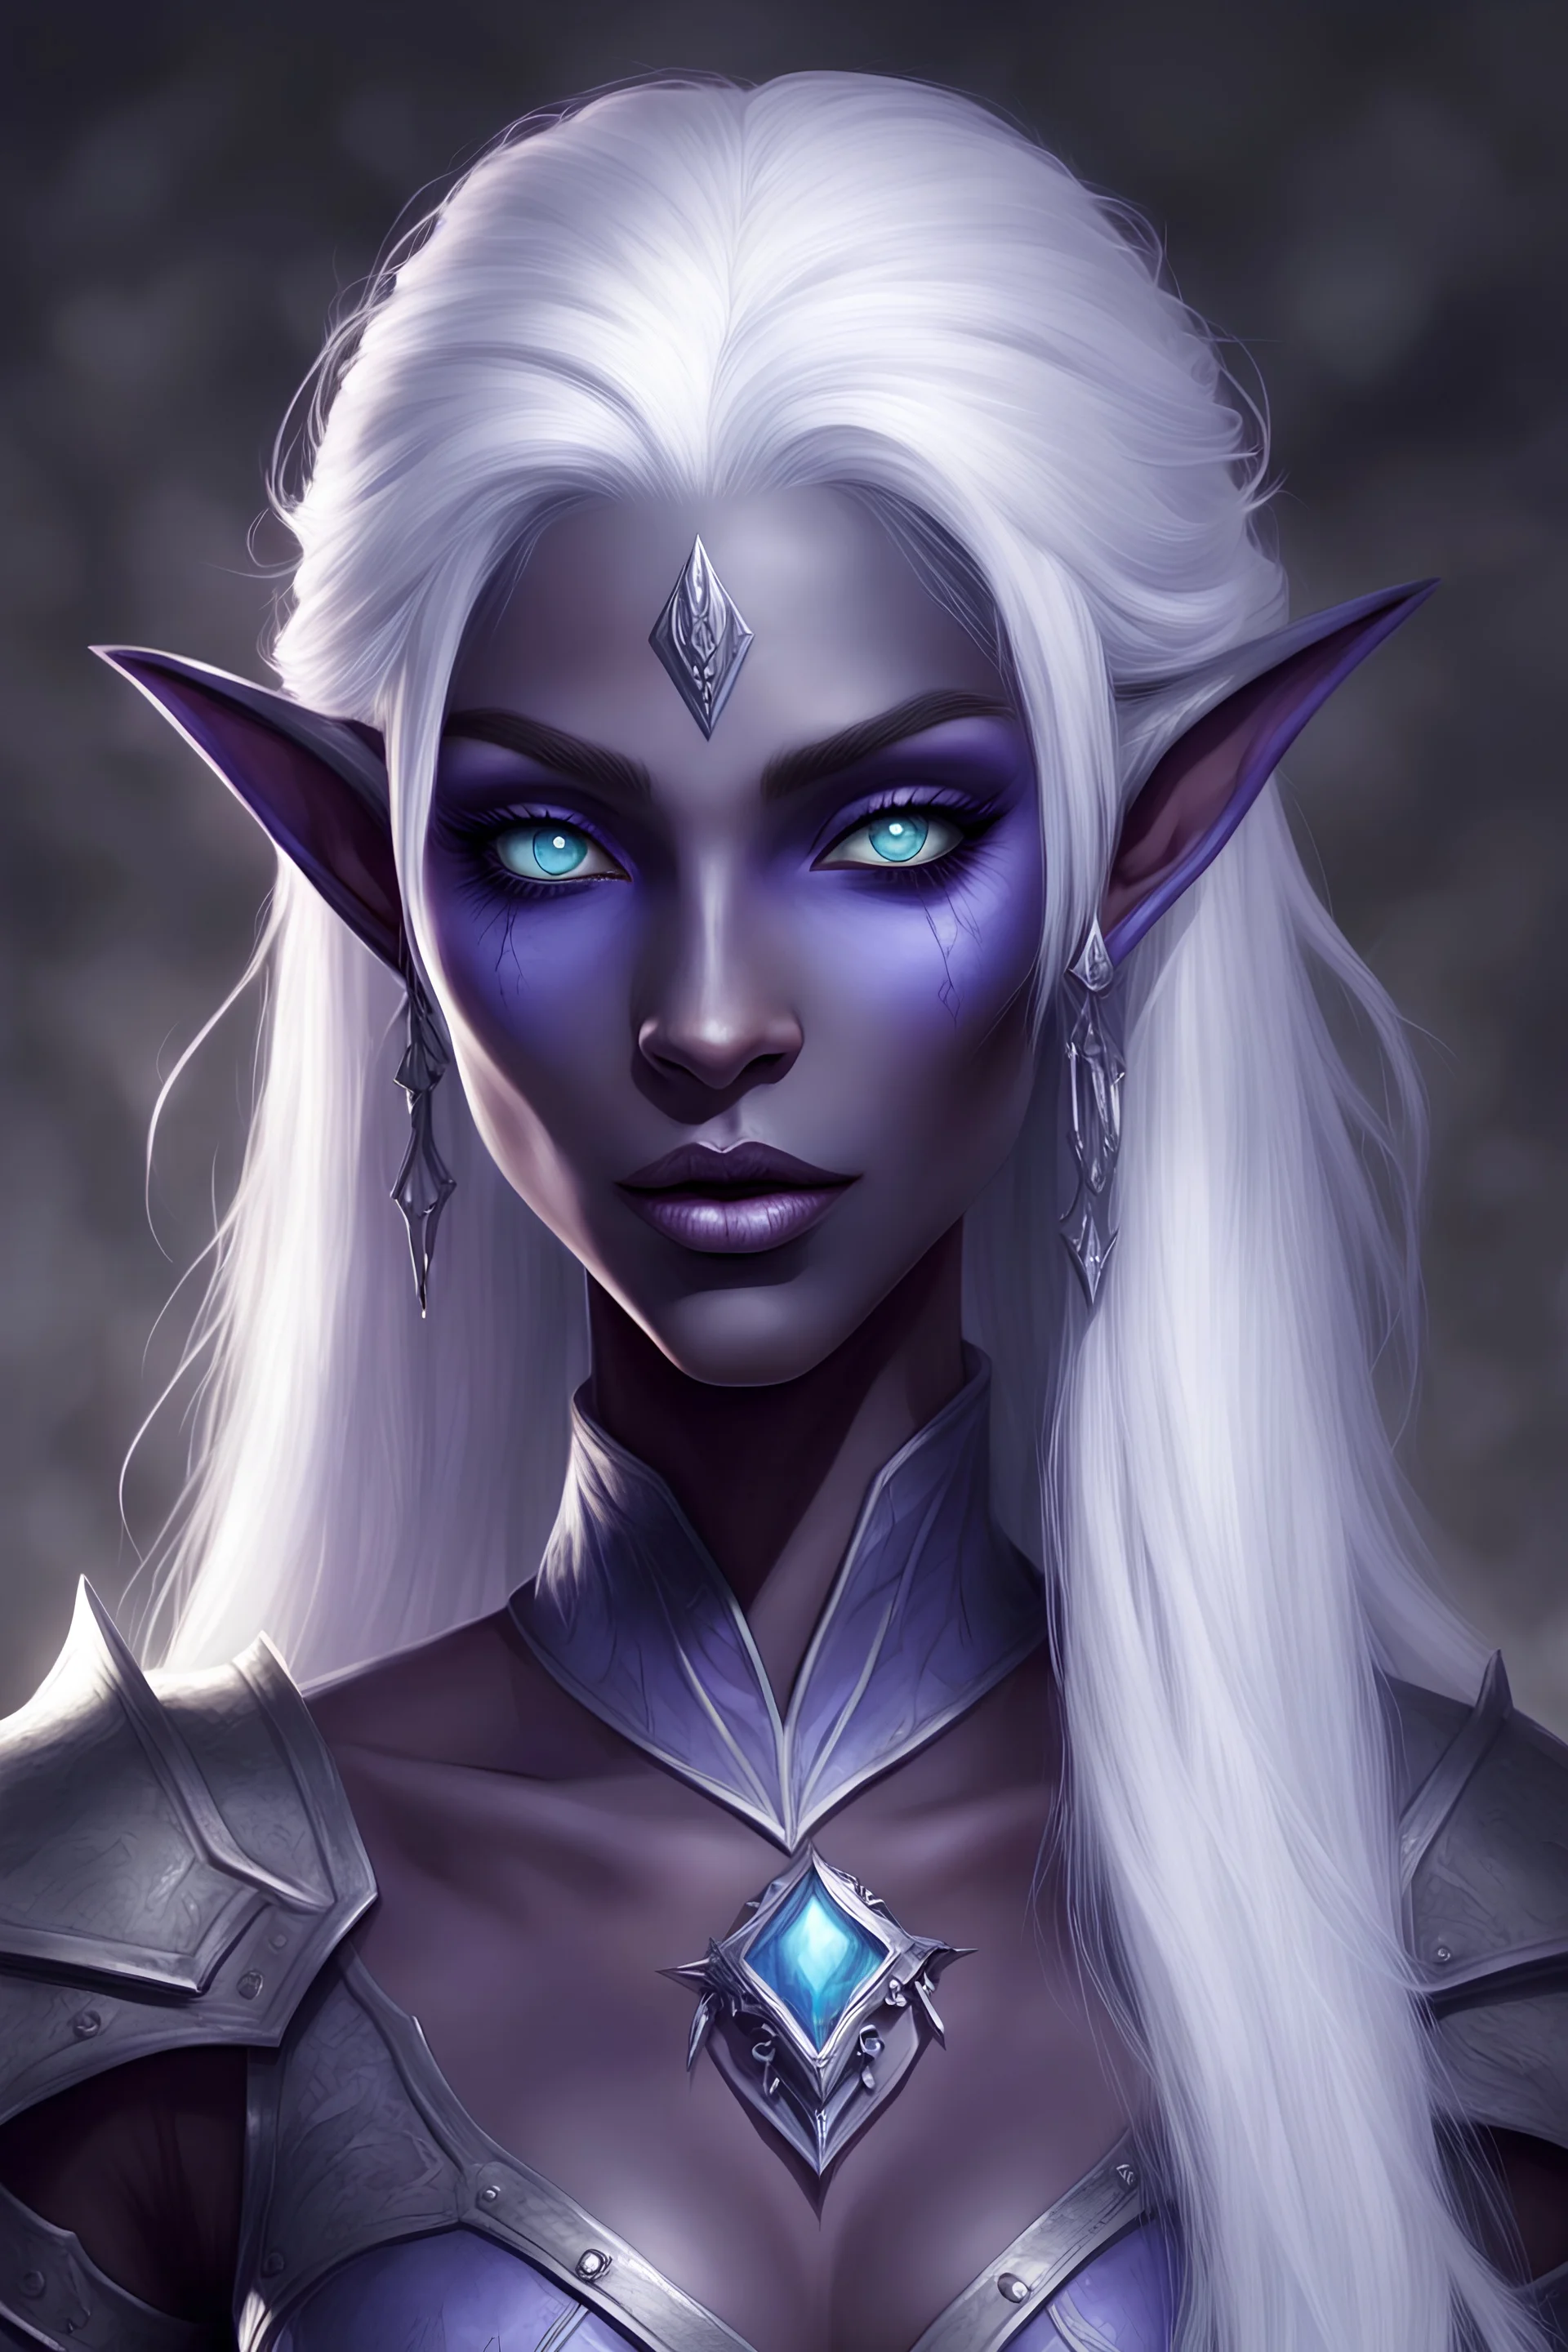 female drow from dungeon and dragons that resembles a dark elf but has purple skin tone with very light blue eyes and stark, long stark white hair decorated with metal accessories, with a kind face, and slender face, young, innocent, with small lips and small nose, beautiful, with a smile, beautiful, young, calm, sweet, bard, accessories in hair, realistic, happy, magical, dancing, wearing a dress with metal decorations, scars, magical, braids, high checkbone